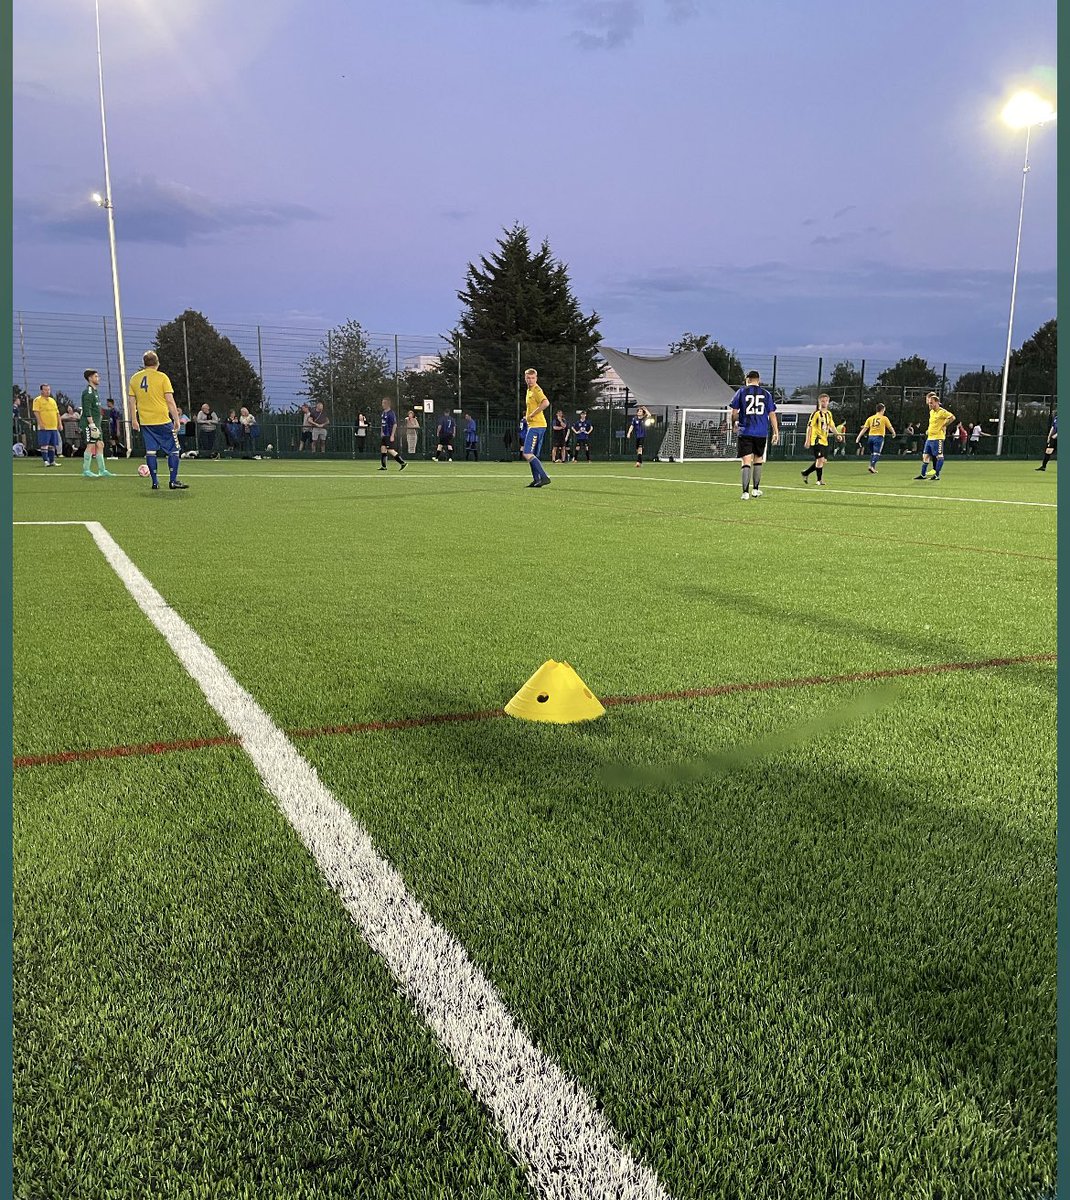 Thank you to our friends @everettrovers adult inclusive for inviting us over this evening for a pre season friendly. Great atmosphere! We all love the new turf too! Lovely evening 🙏🏻🙌🙂⚽️⚽️ #FootballFun @CityYouthFC @SACYInclusive